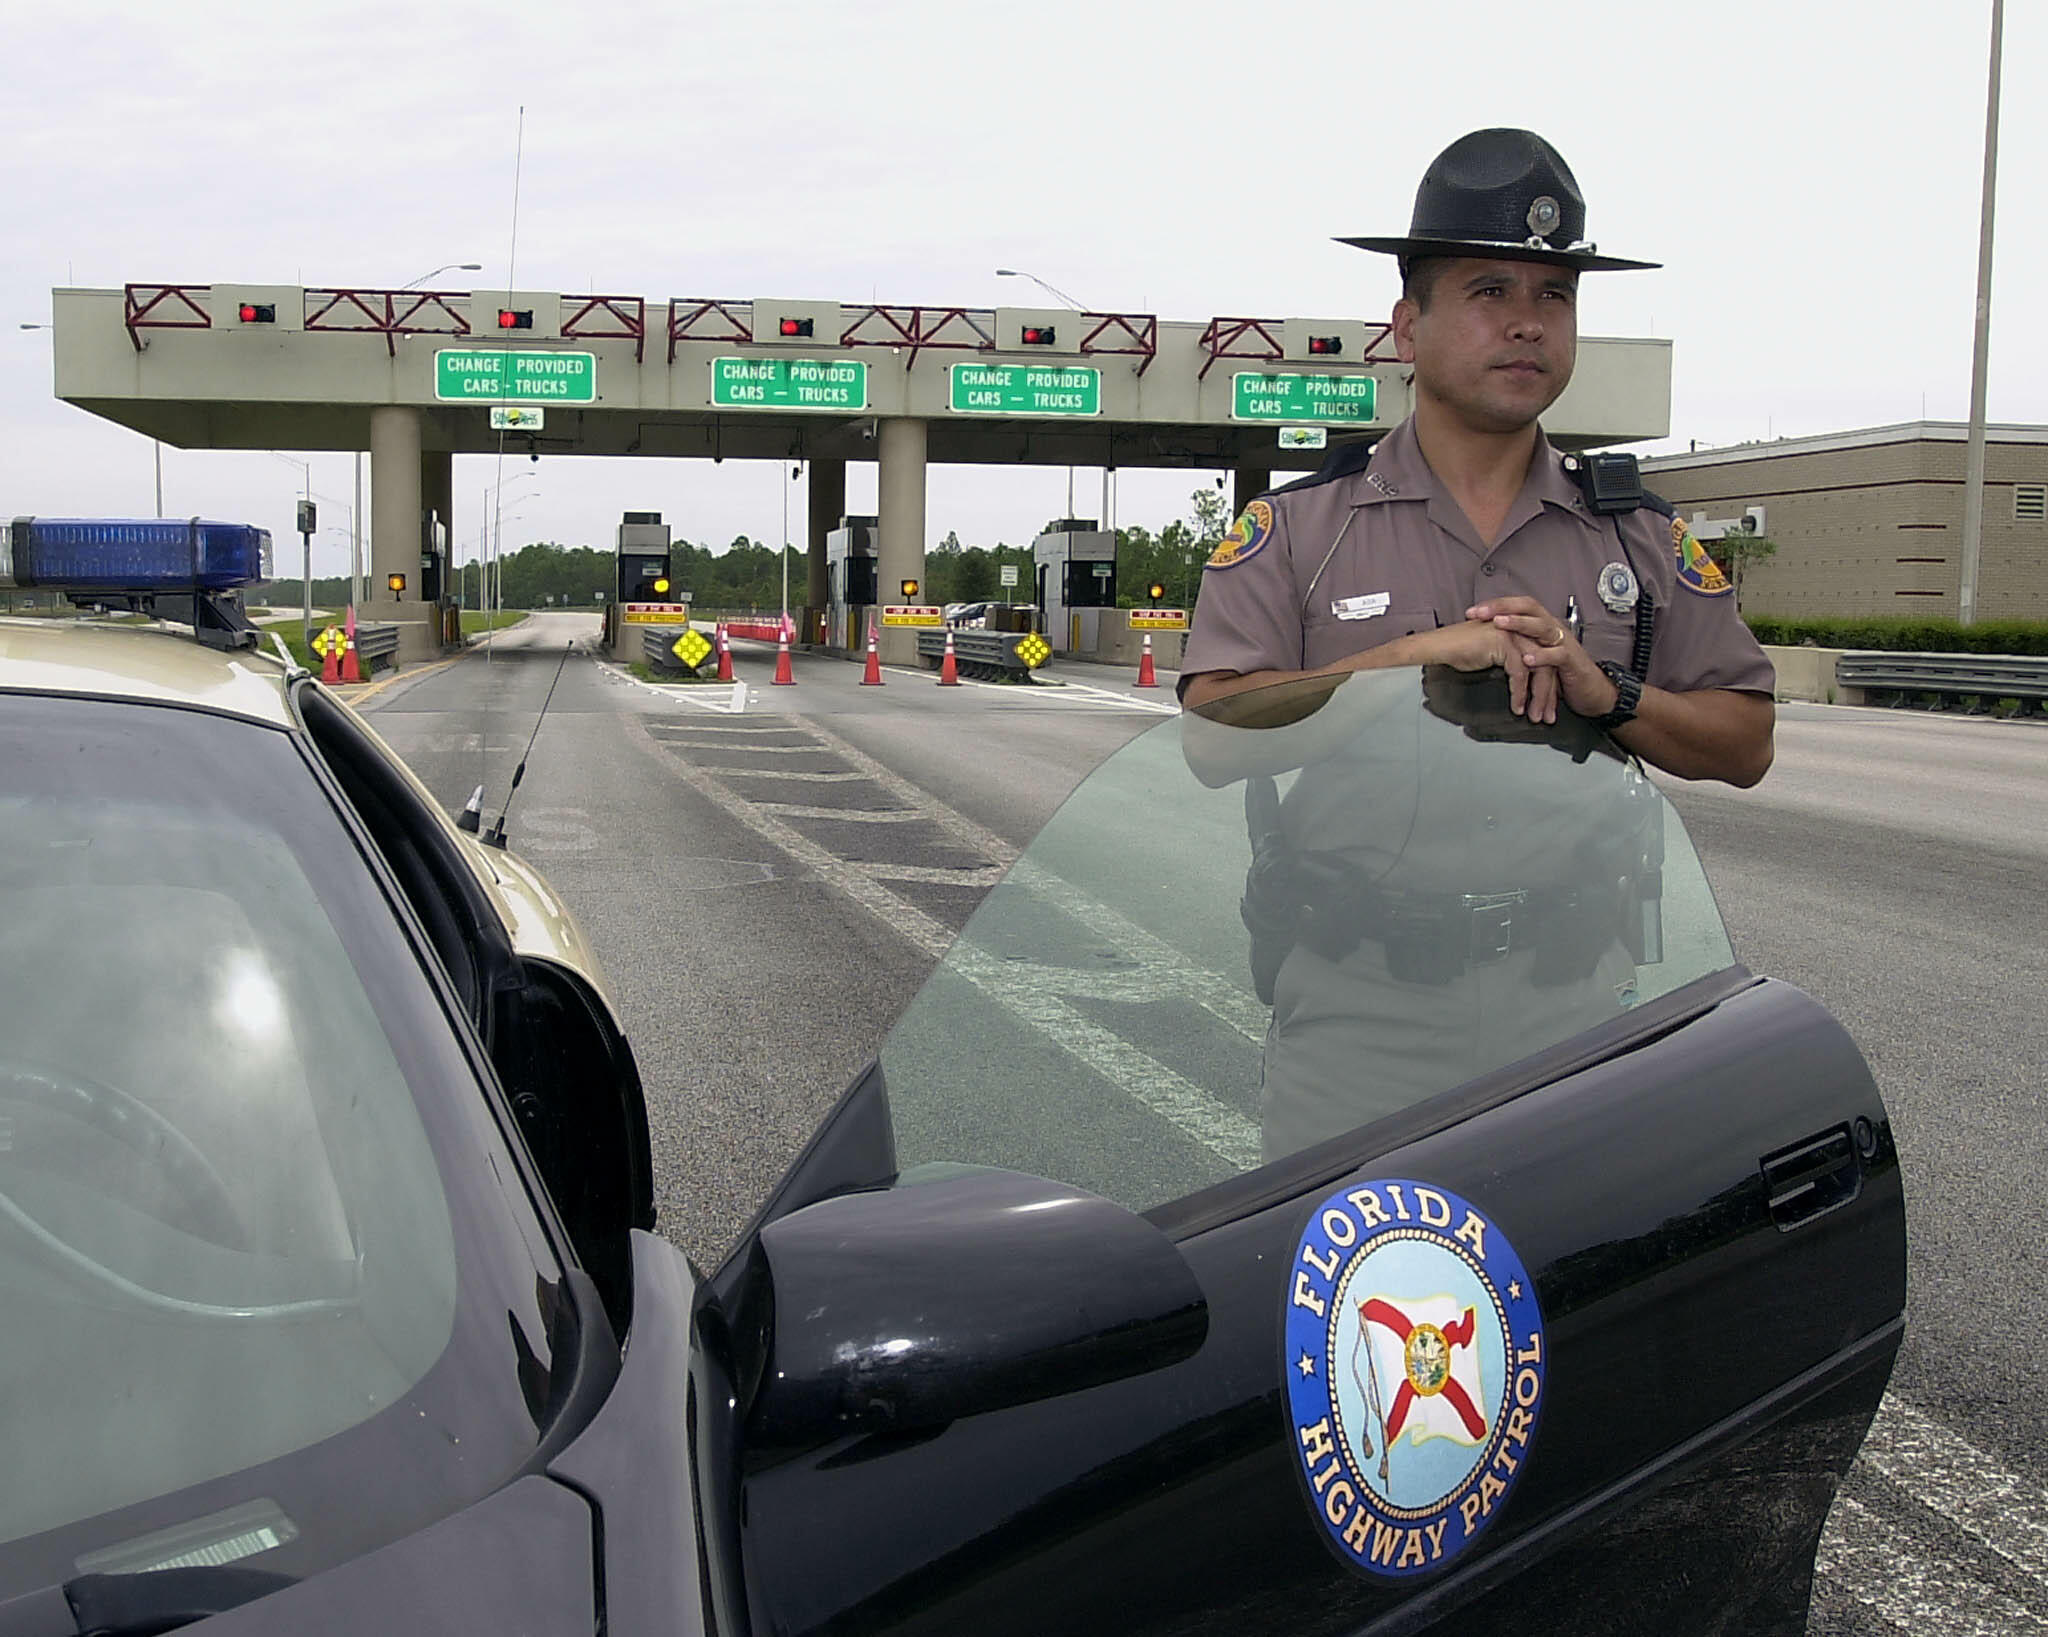 NAPLES, :  Florida Highway Patrol Officer Ray Ada stands guard at the closed Edward J. Beck toll plaza 13 September 2002 during the search of two isolated vehicles belonging to three men in suspicion of plotting an explosives attack located on I-75 in sou